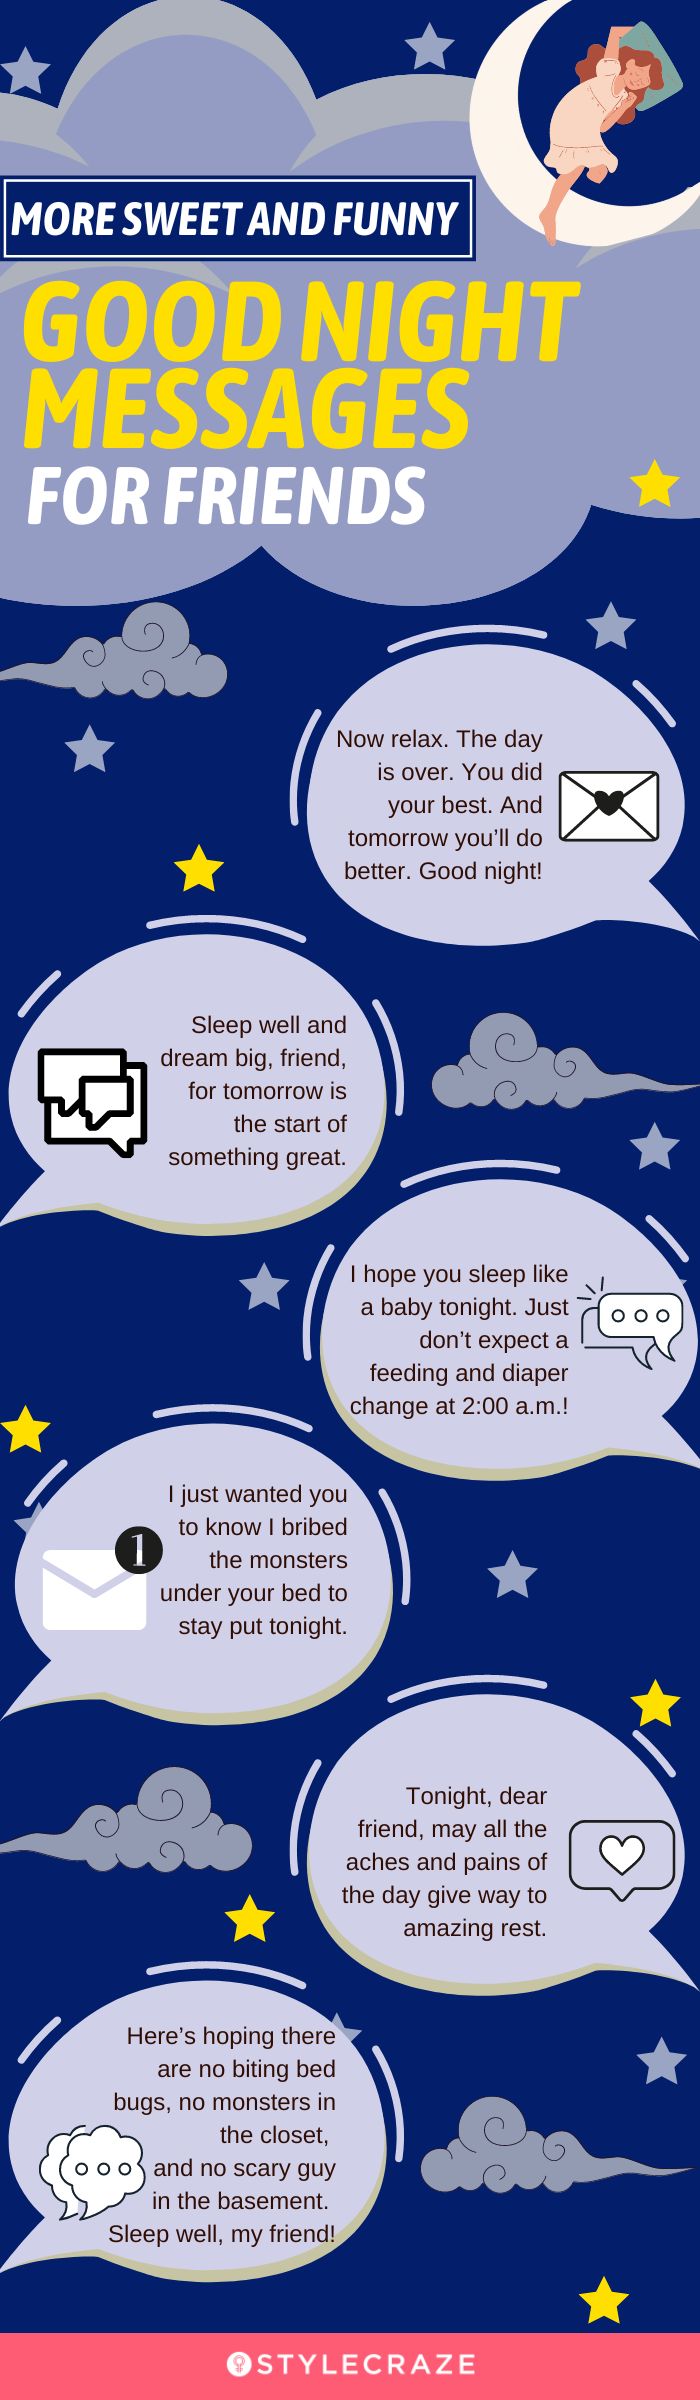 good night messages for friends (infographic)